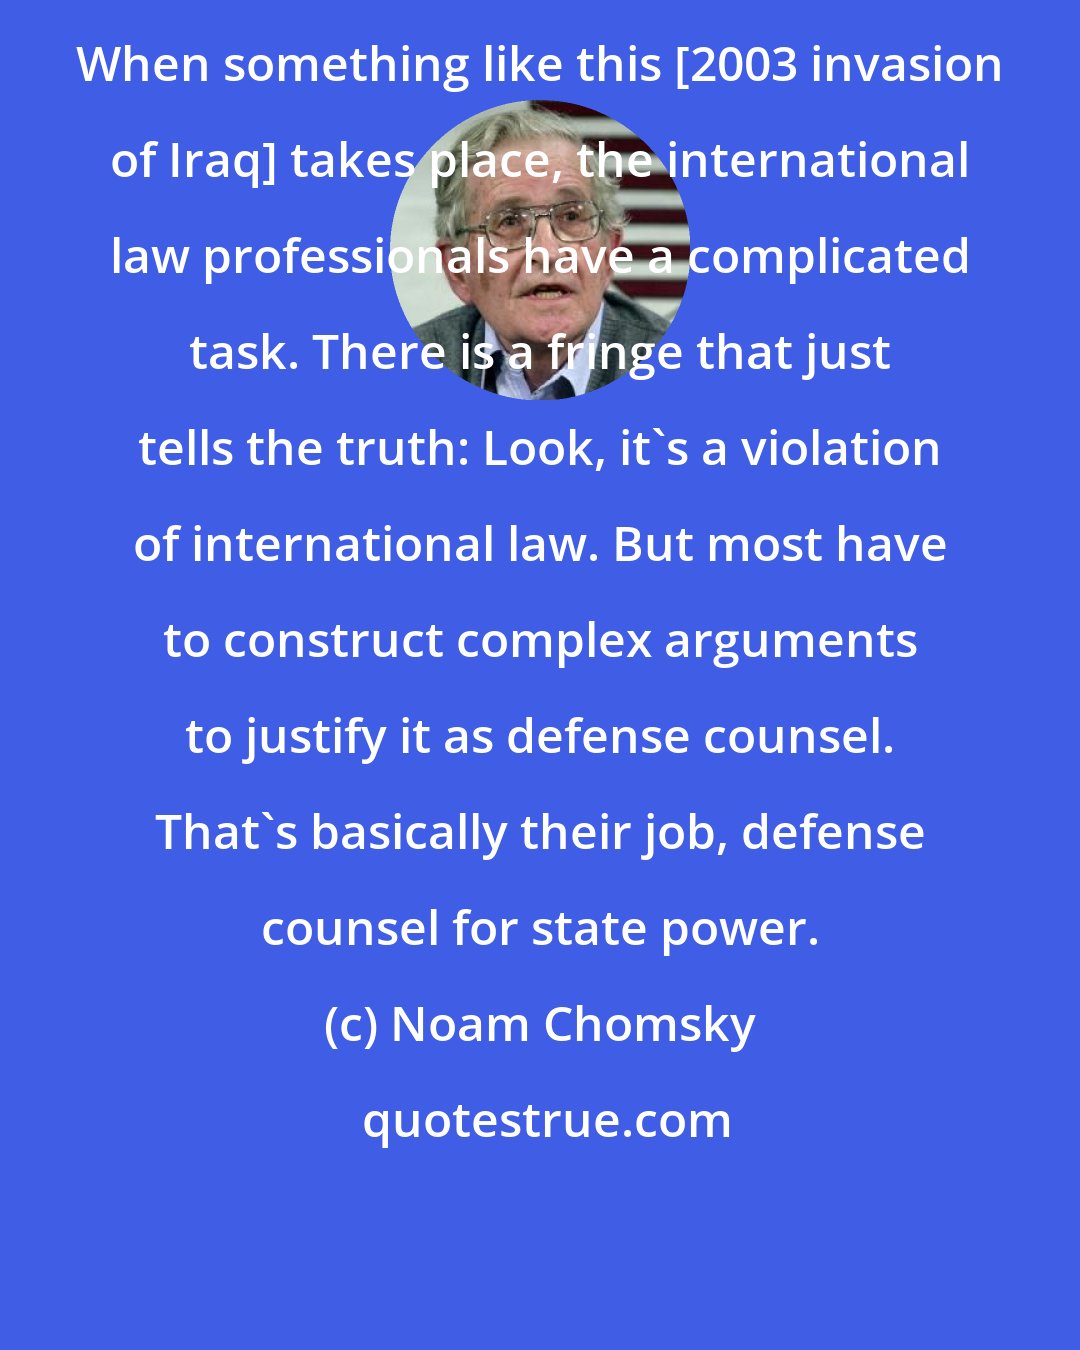 Noam Chomsky: When something like this [2003 invasion of Iraq] takes place, the international law professionals have a complicated task. There is a fringe that just tells the truth: Look, it's a violation of international law. But most have to construct complex arguments to justify it as defense counsel. That's basically their job, defense counsel for state power.